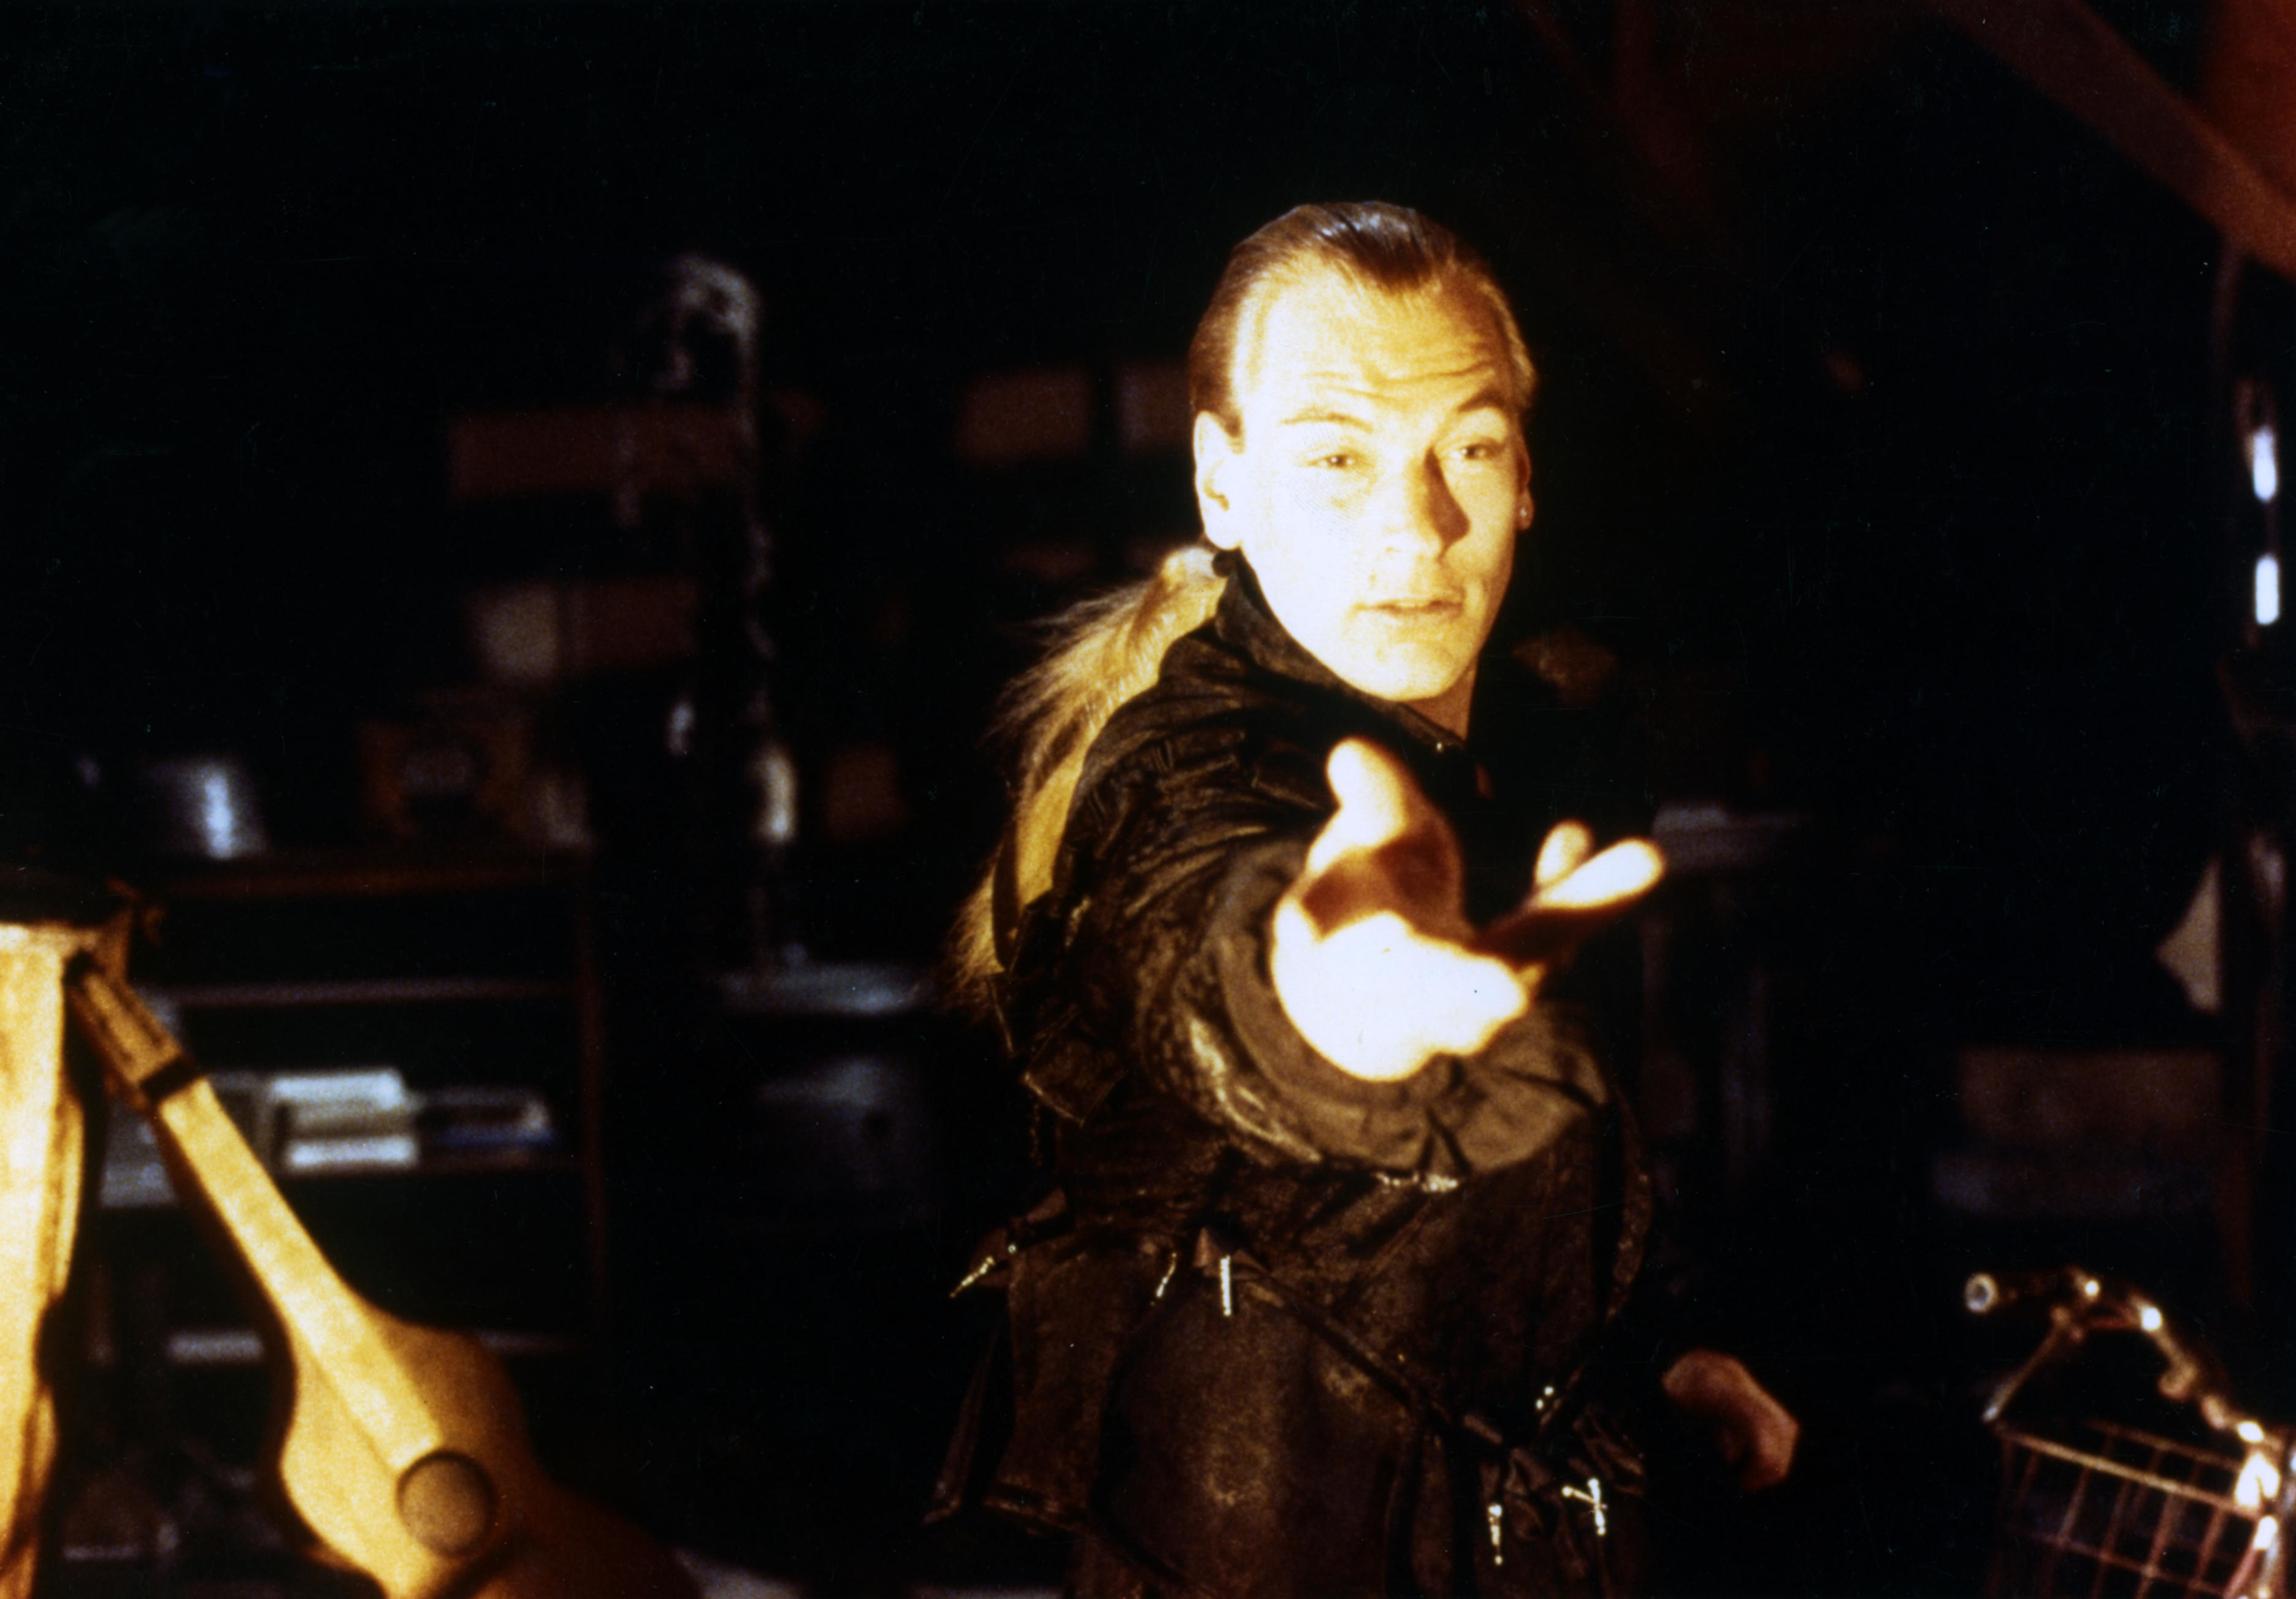 Julian Sands attempts to conjure witchcraft in a dark room